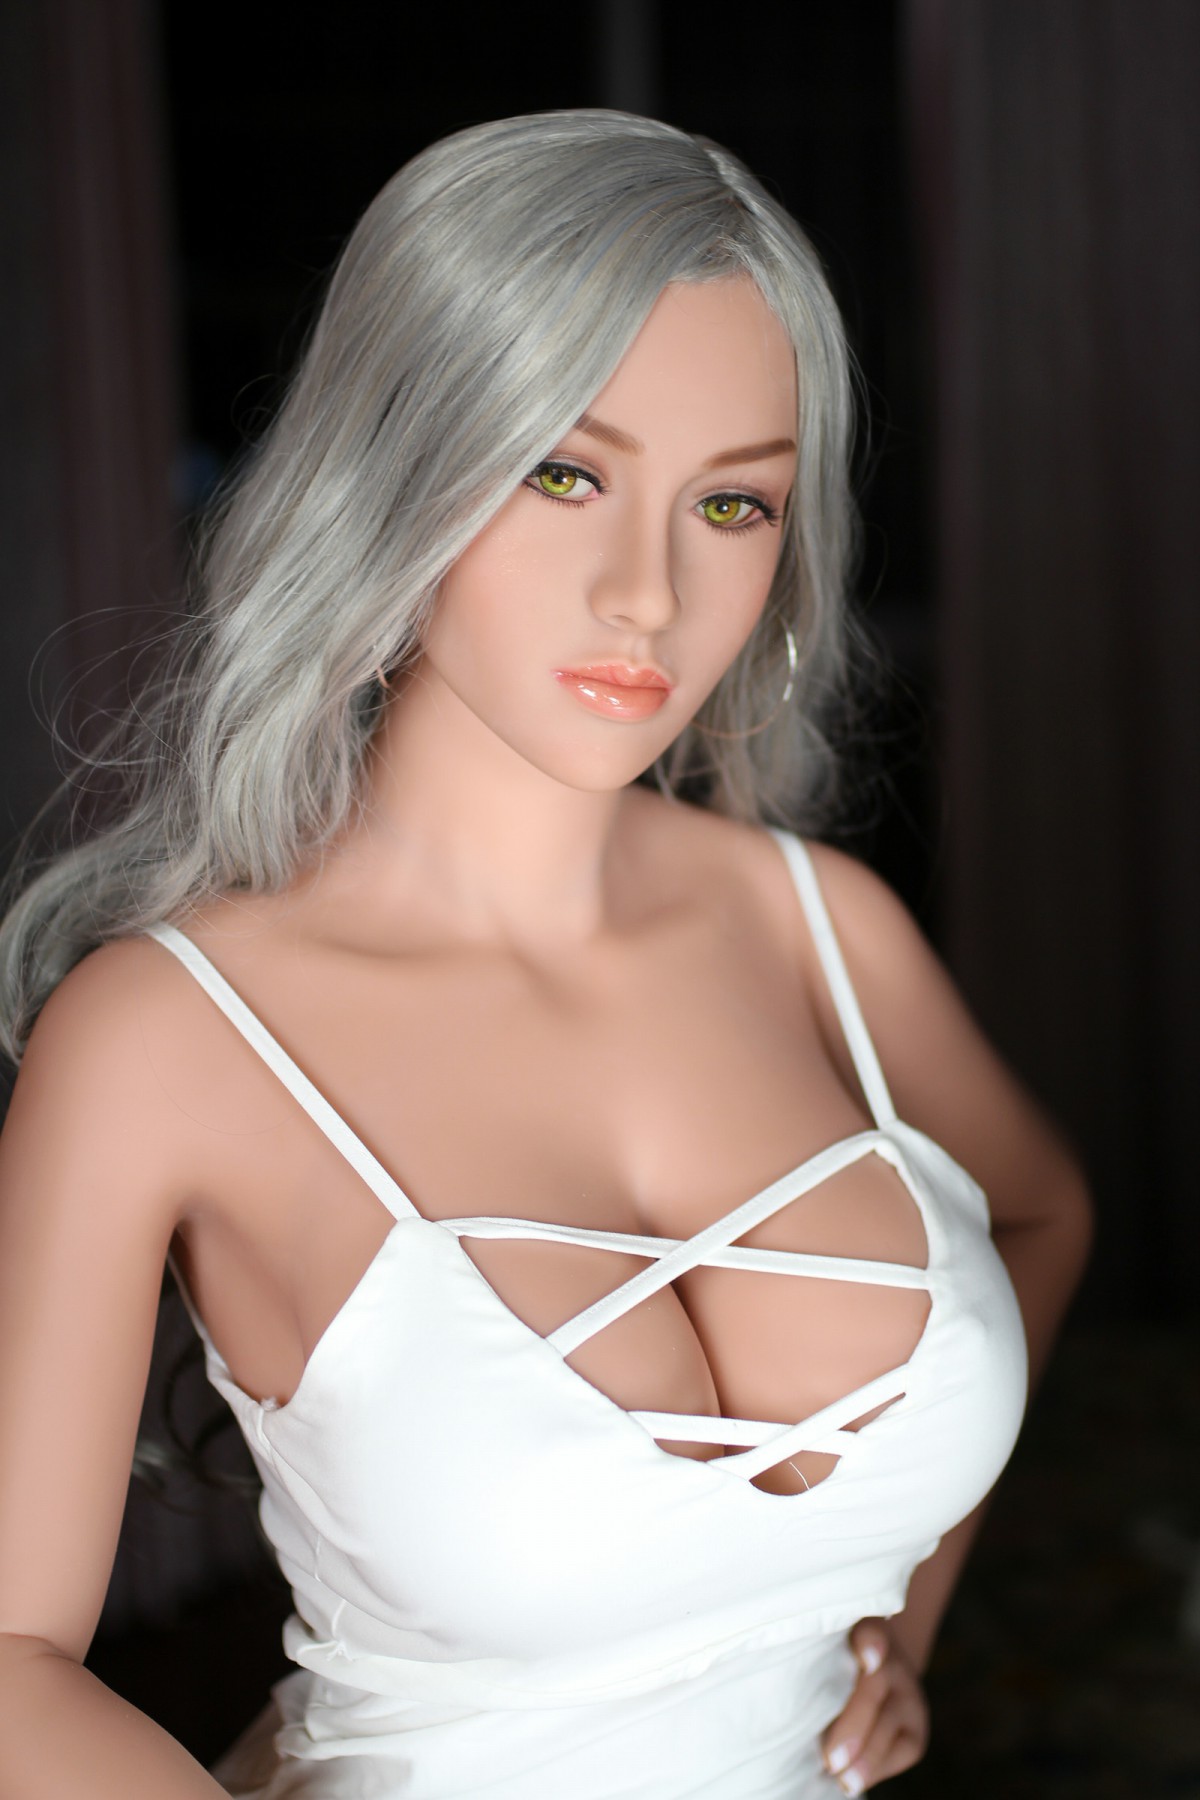 The Pearl of the palm, big chest, green hair, unlimited fantasy Silicon sex doll 158cm men toys sex adult real